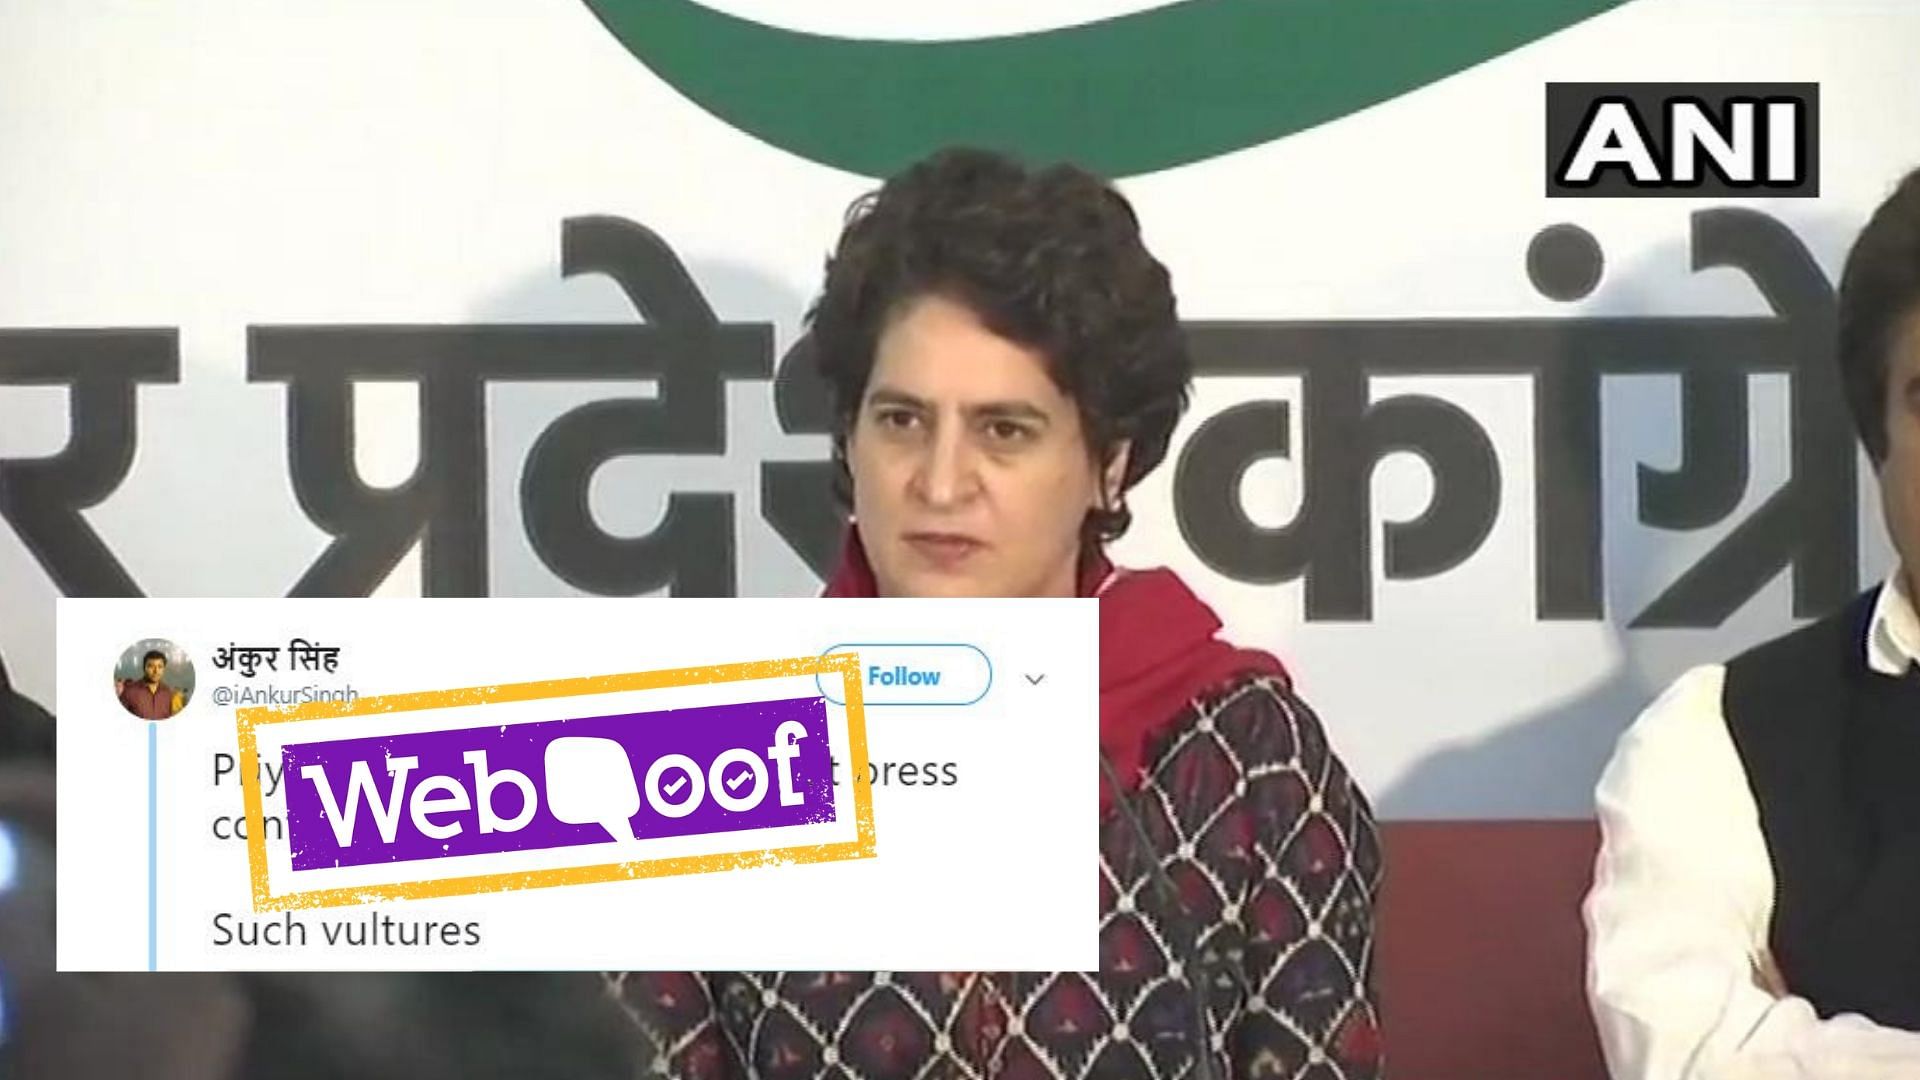 The original video has been cropped to make it appear as though Vadra was laughing at the press meet. &nbsp;